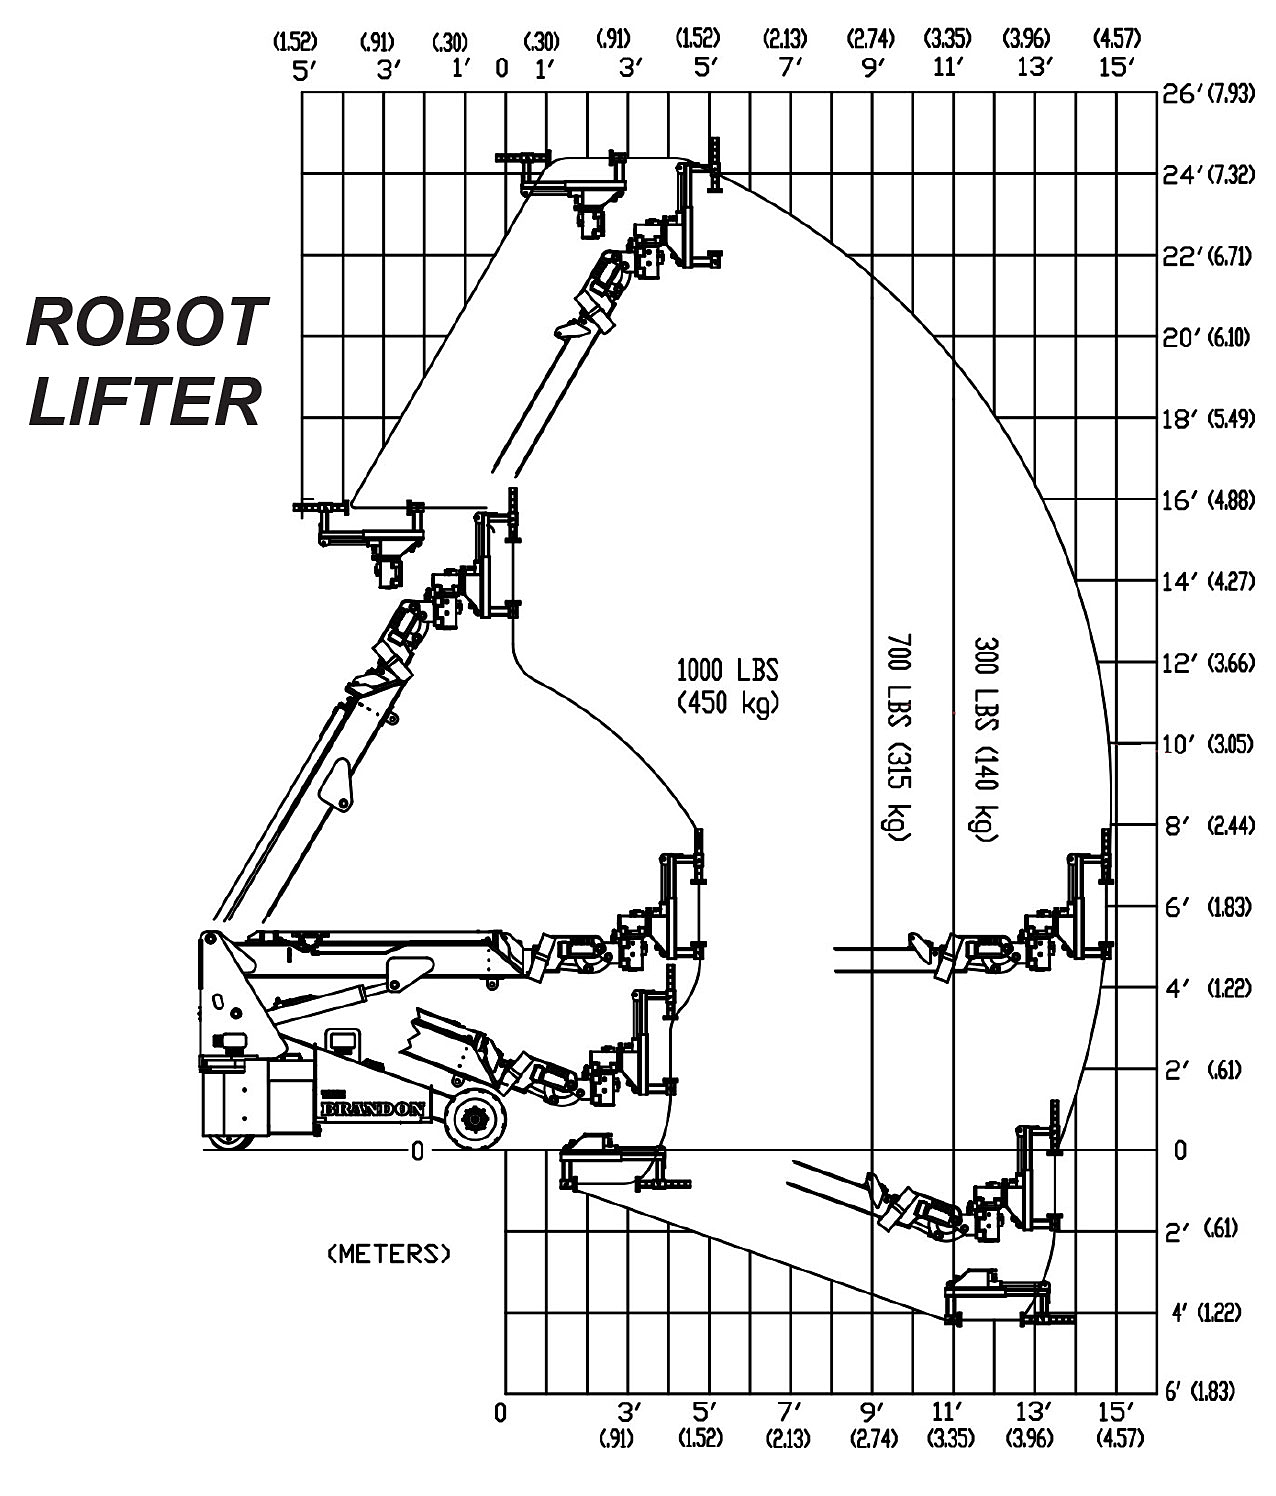 The Brandon Electric Robot Lifter Load Capacity